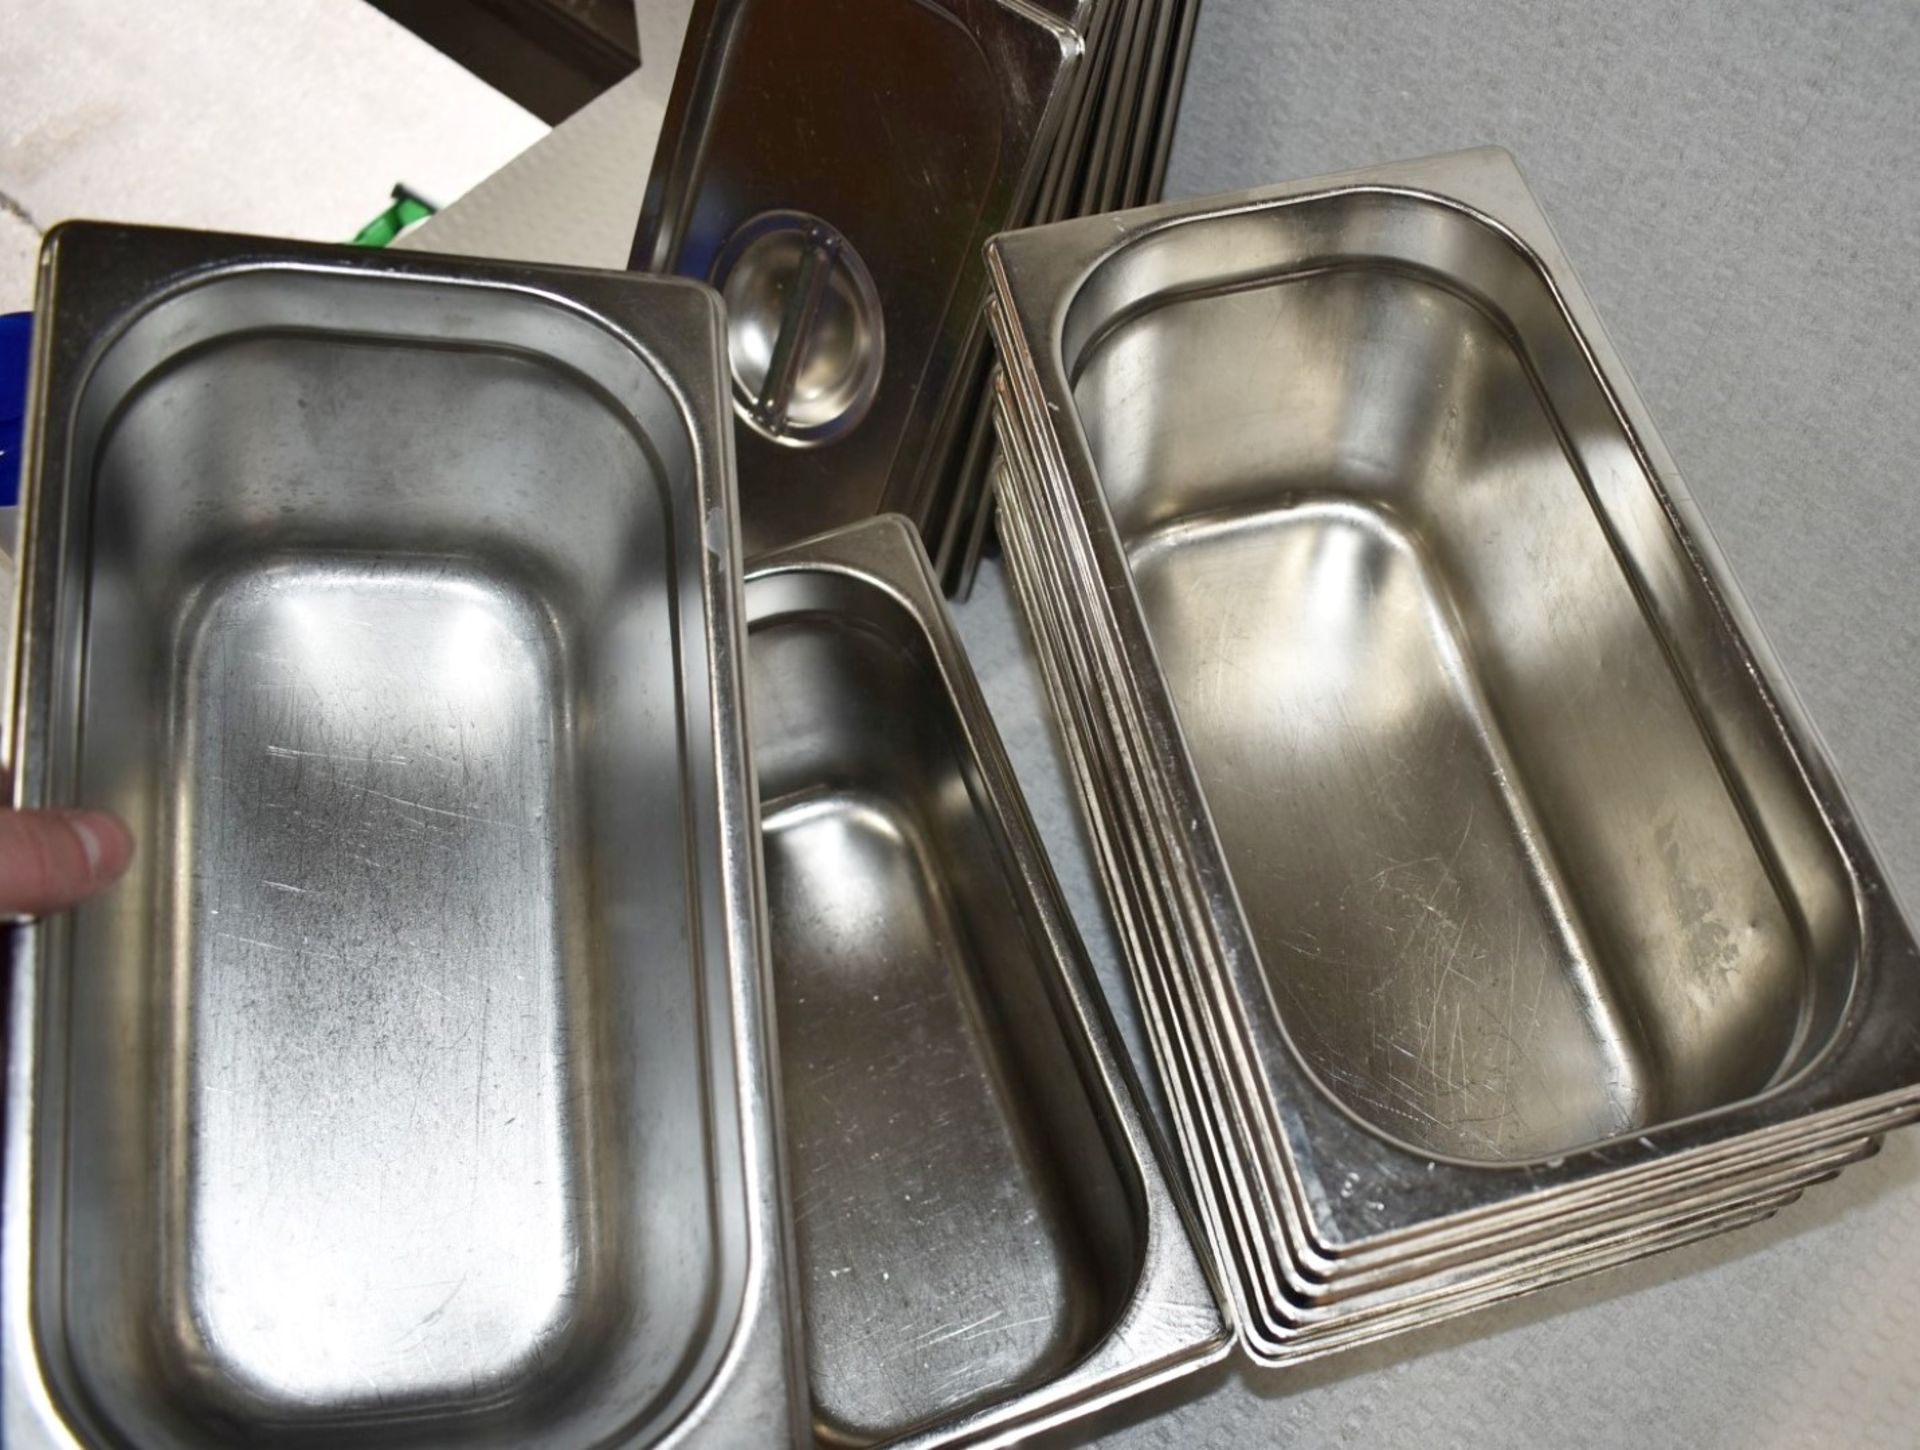 8 x Vogue Stainless Steel 1/3 Gastronorm Pans With Lids - Size: H15 x W17.5 x L32 cms - Image 2 of 5